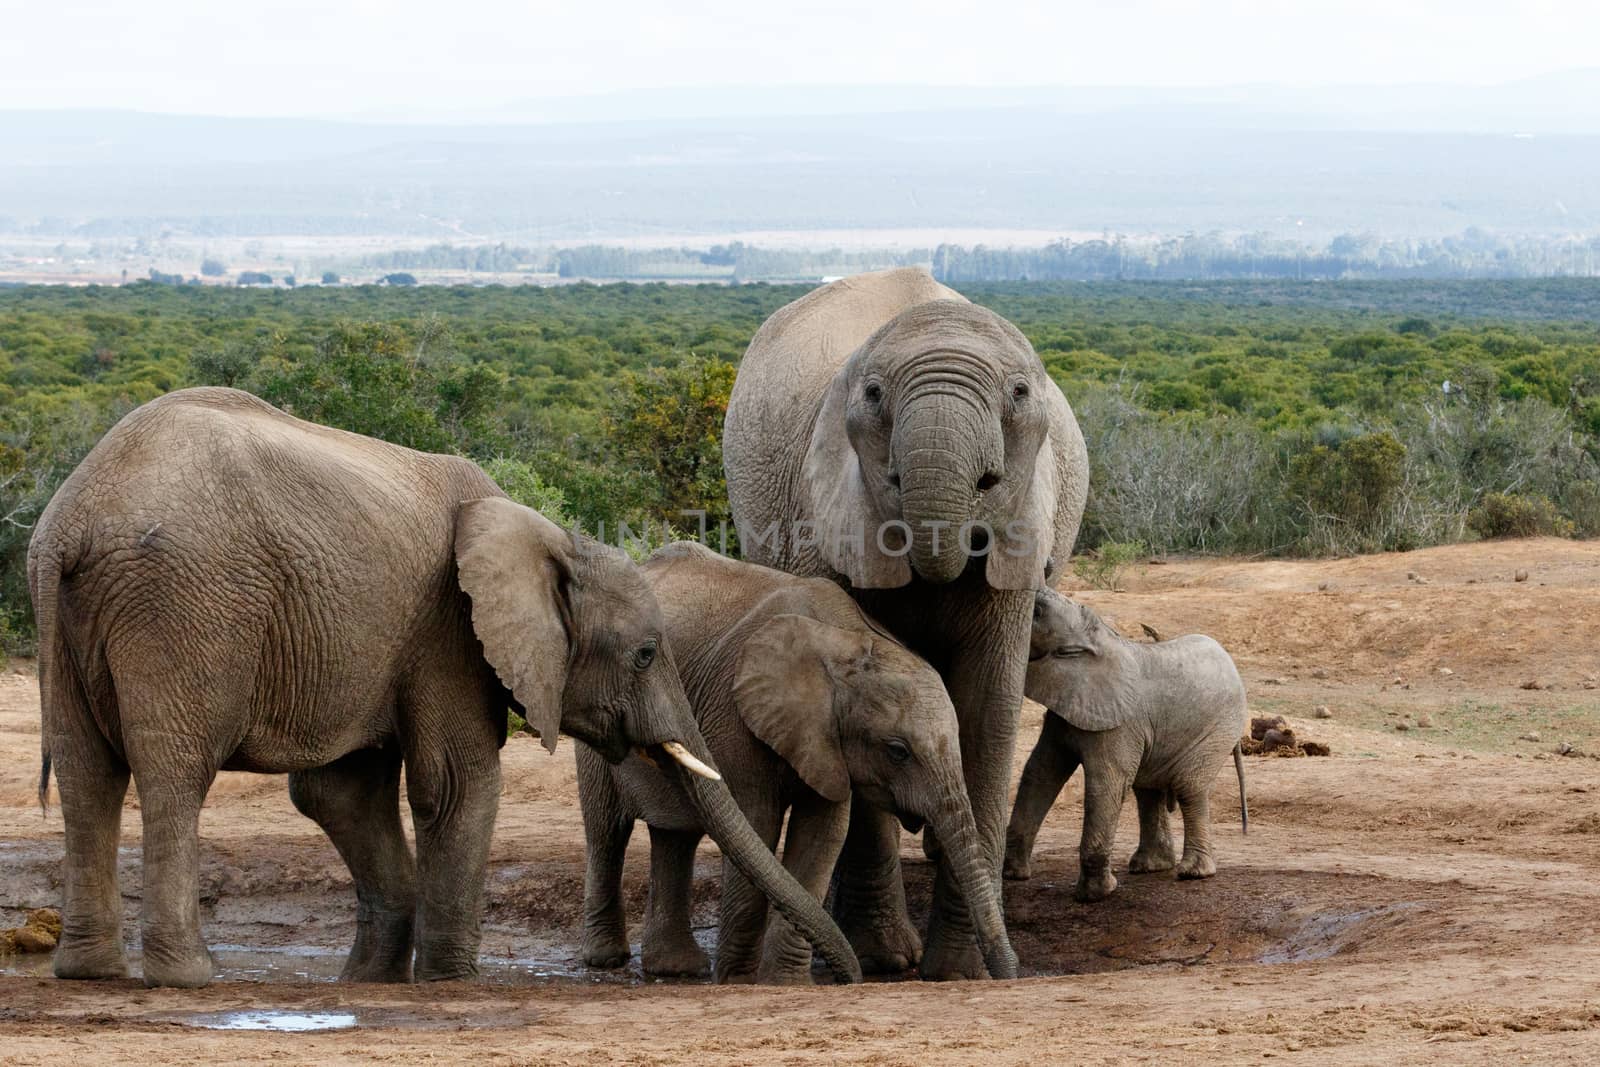 The Real African Bush Elephant family - The African bush elephant is the larger of the two species of African elephant. Both it and the African forest elephant have in the past been classified as a single species.